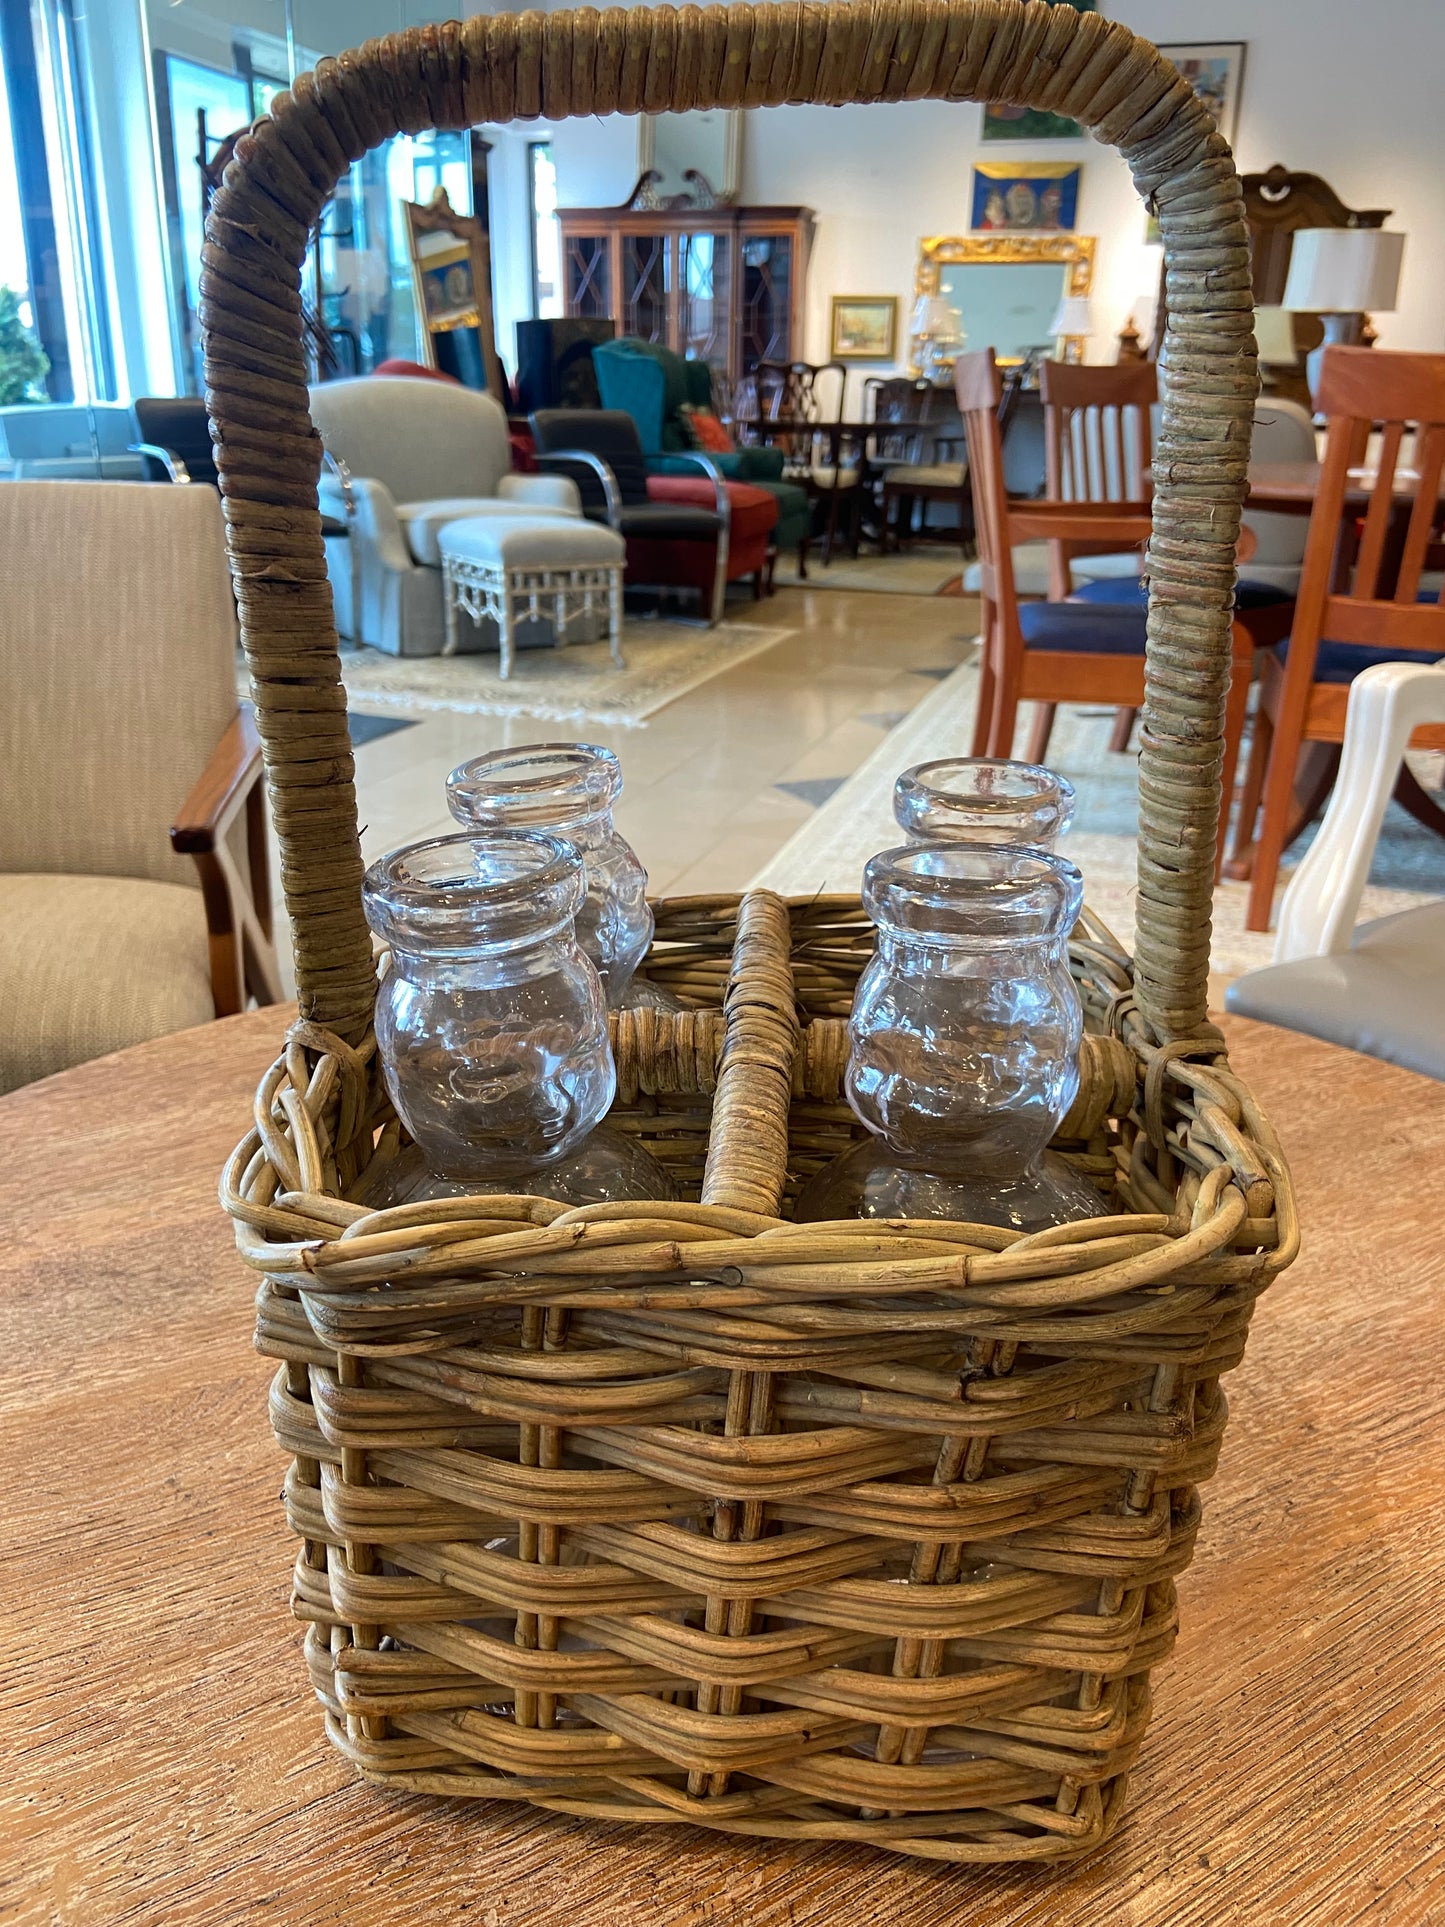 Basket with Four Babyhead Bottles (24298)